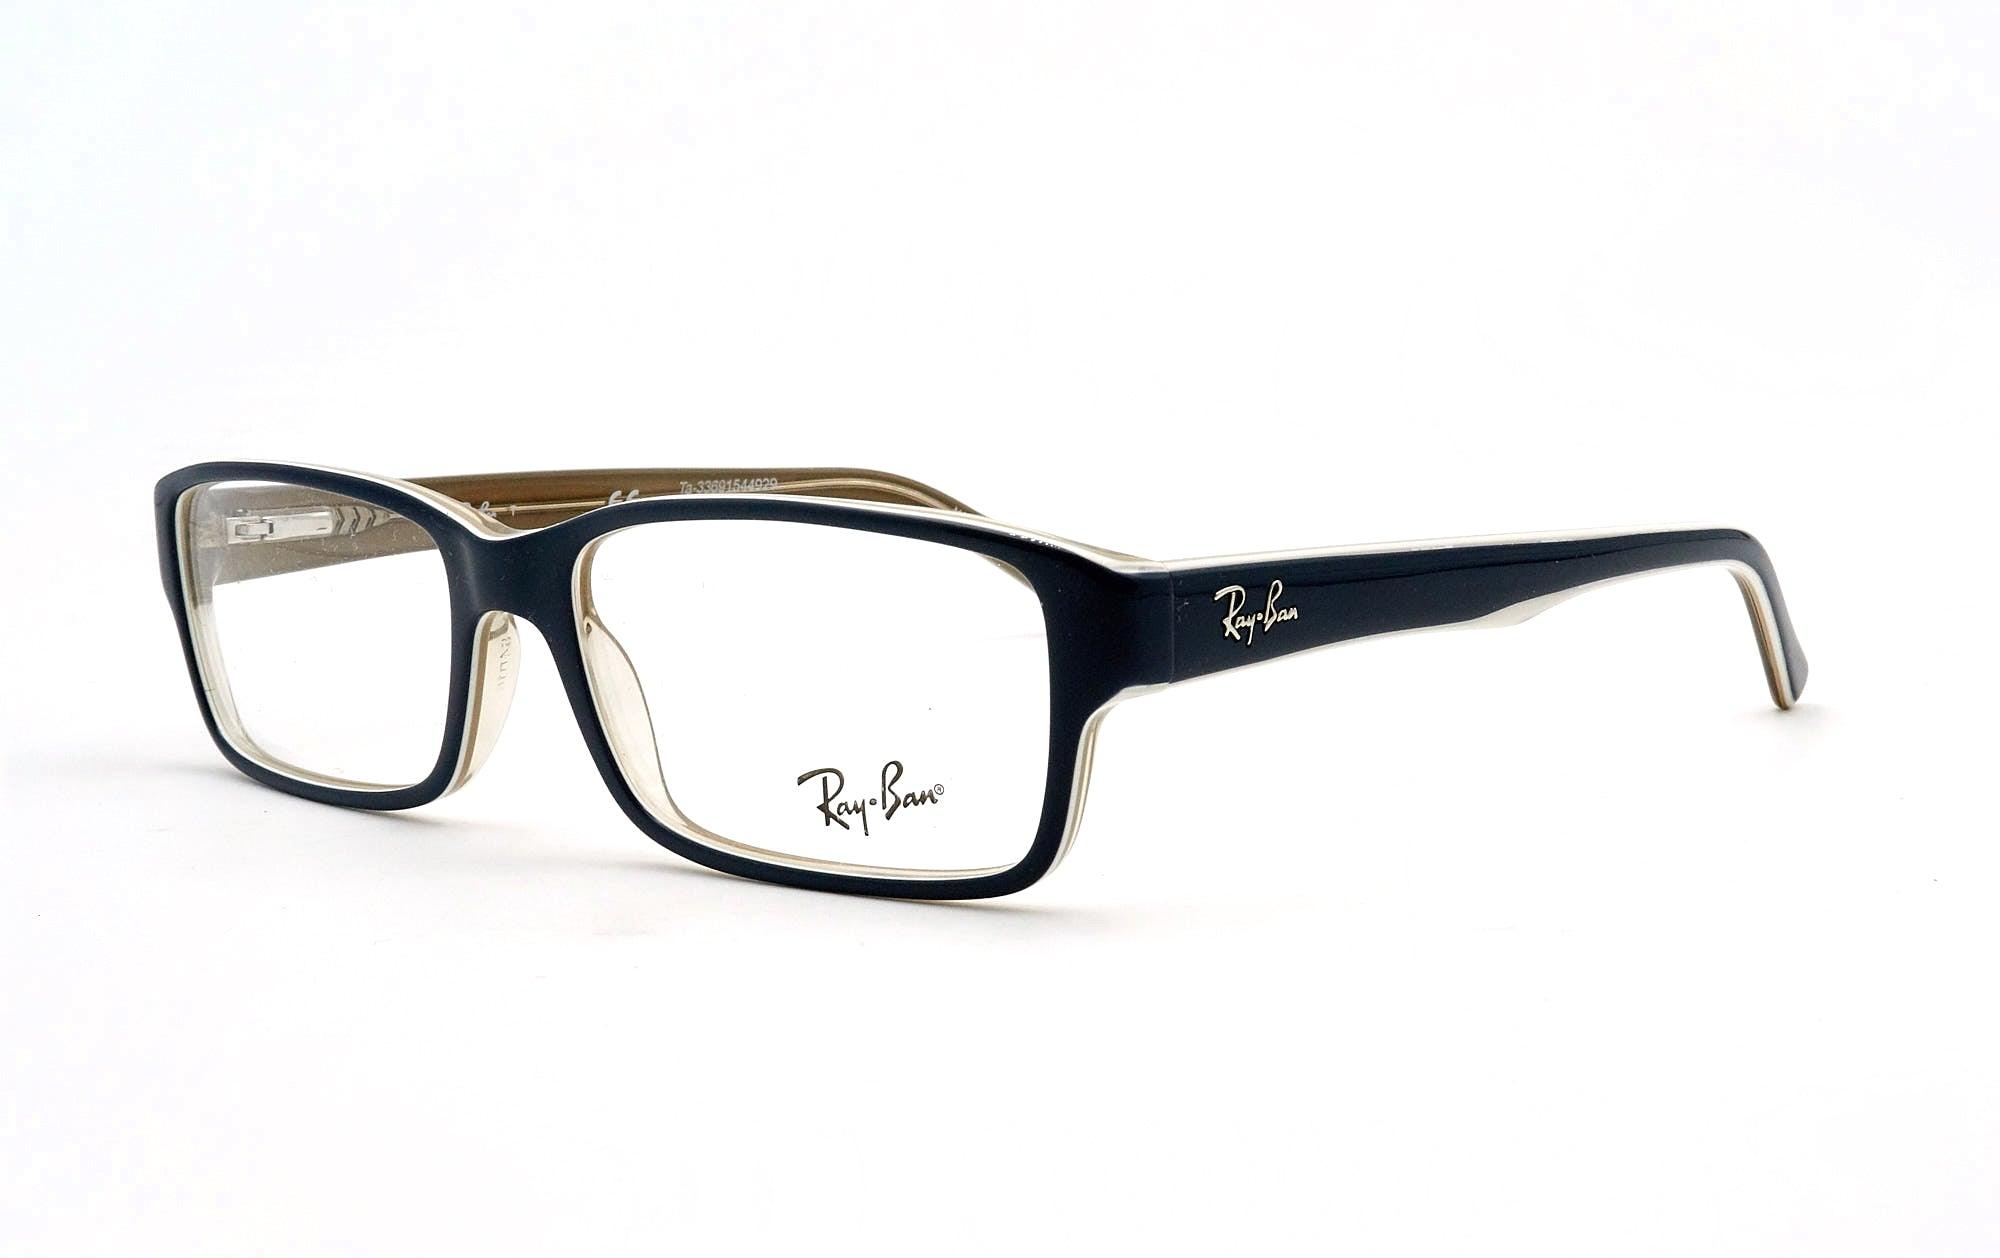 RAY-BAN 5169 8119 - Opticas Lookout